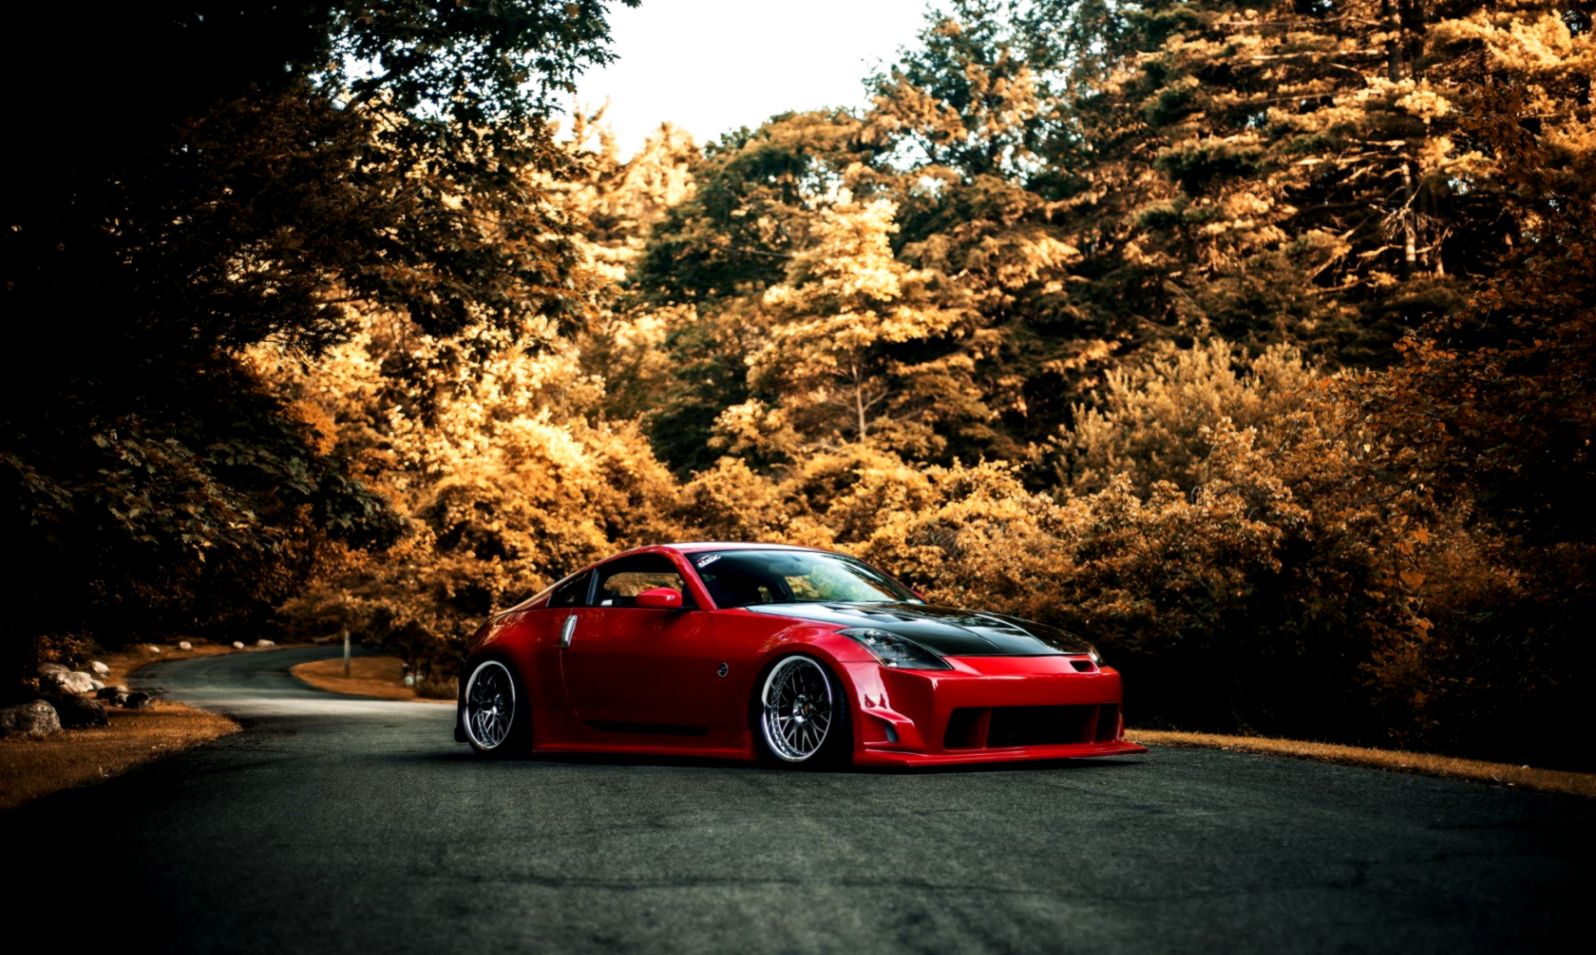 Nissan 350Z Tuning Red Car Hd Wallpaper Wallpapers Images 1596x955